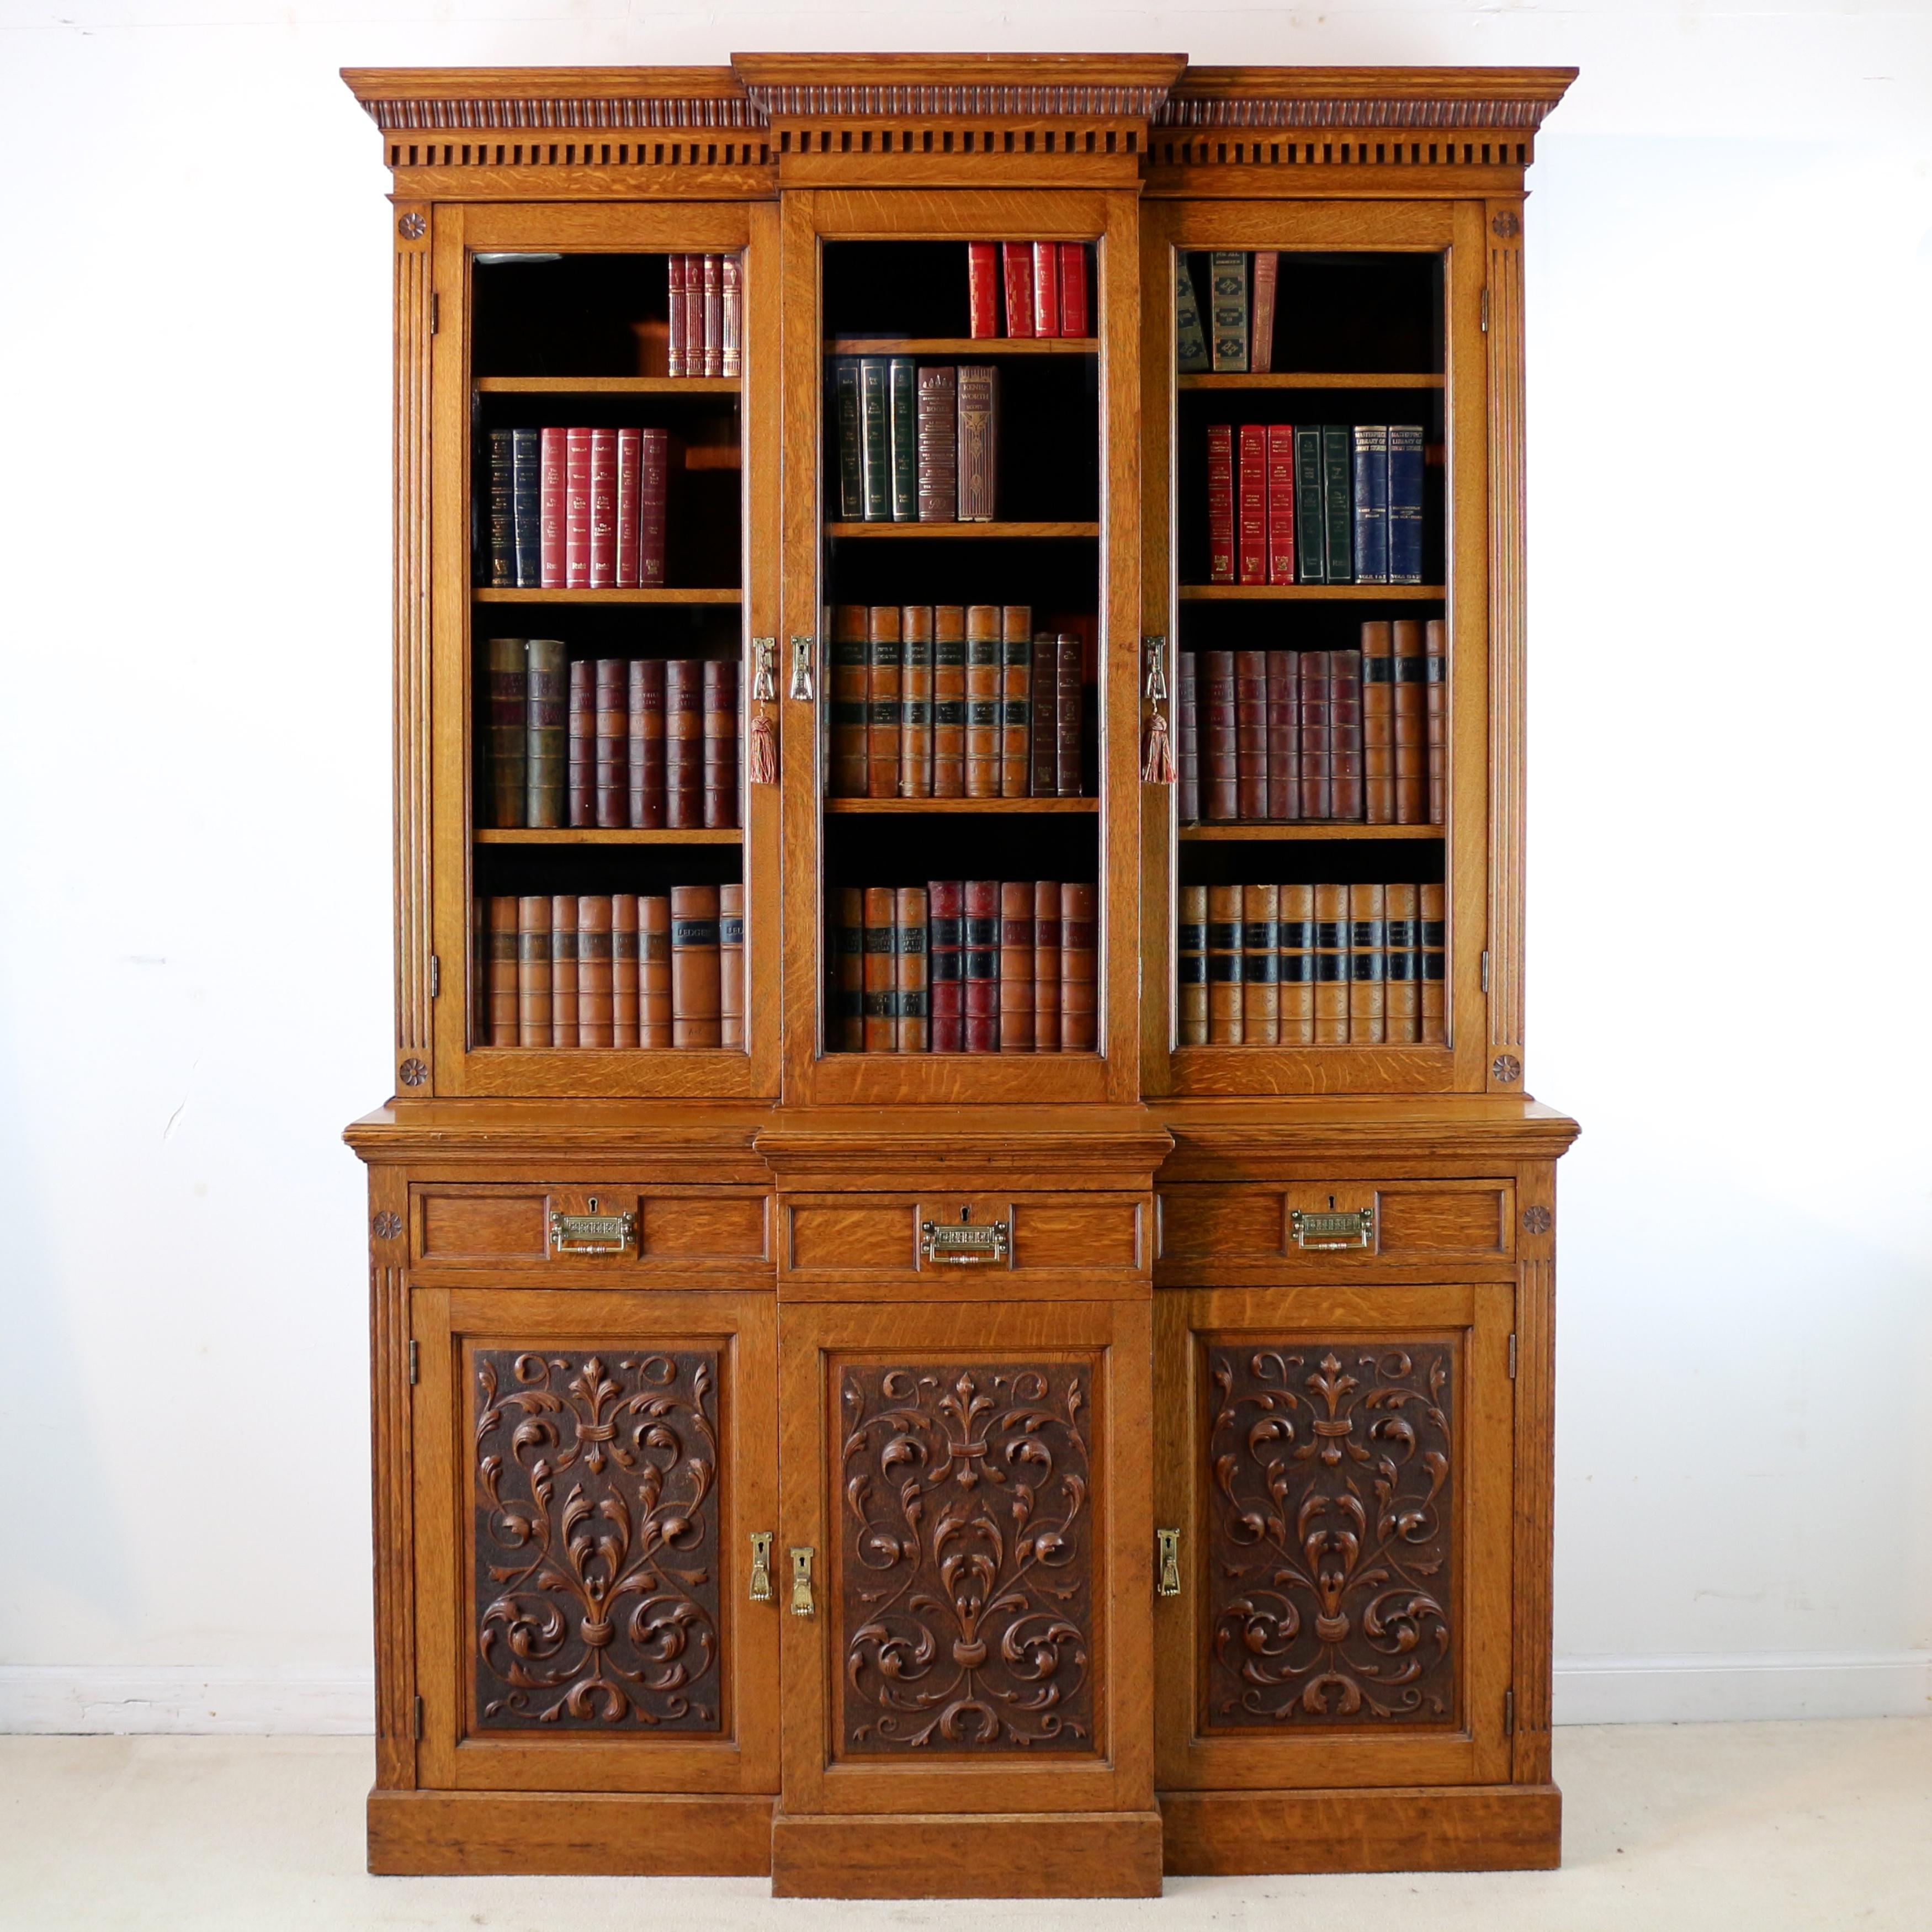 A beautiful Victorian three door breakfront bookcase or display cabinet attributed to Maple & Co and in the Art Nouveau/Arts & Crafts taste. In golden quarter-sawn oak with bevelled glass panes to the glazed doors it features a reeded and dentil